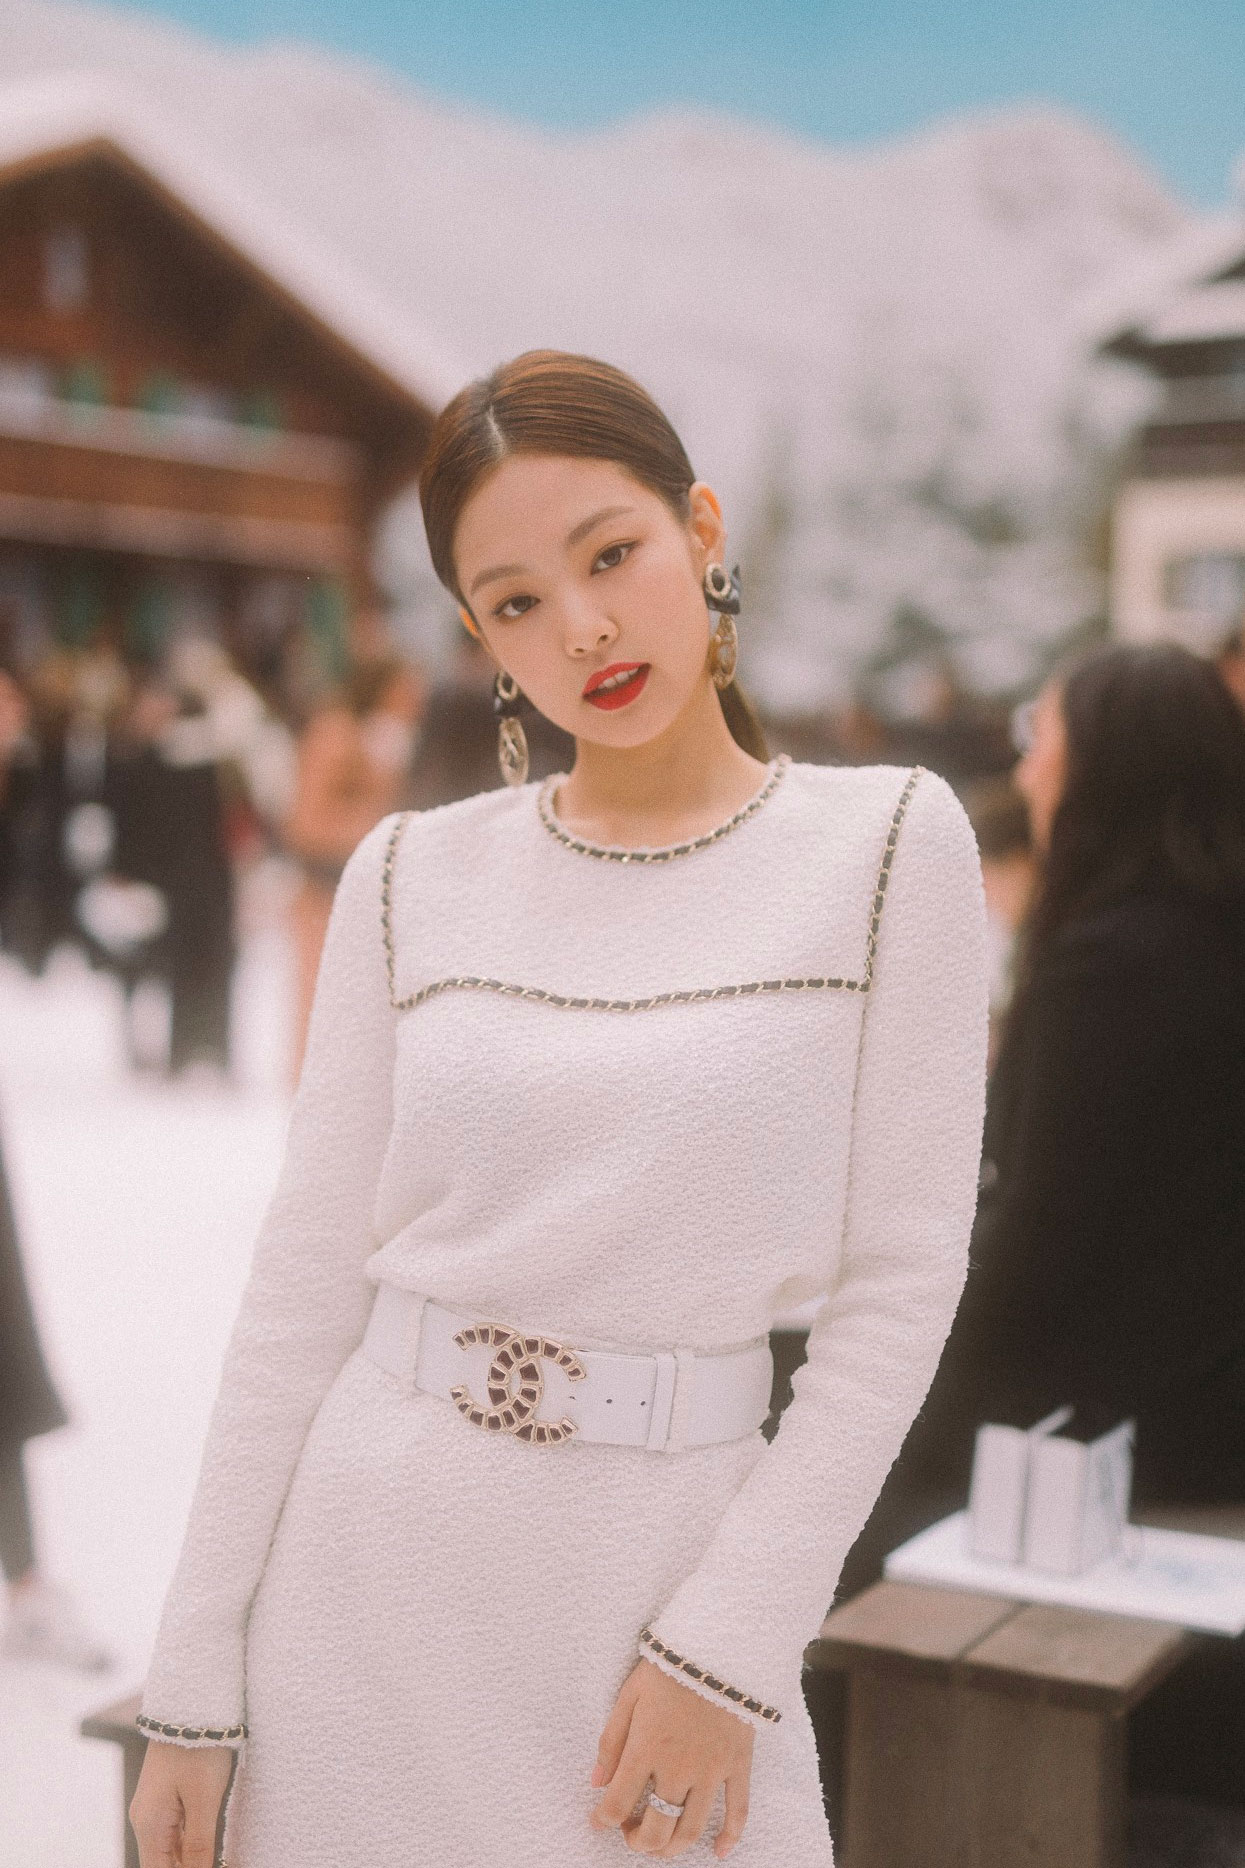 Jennie From Blackpink is the K-Pop Style Icon You Should Know